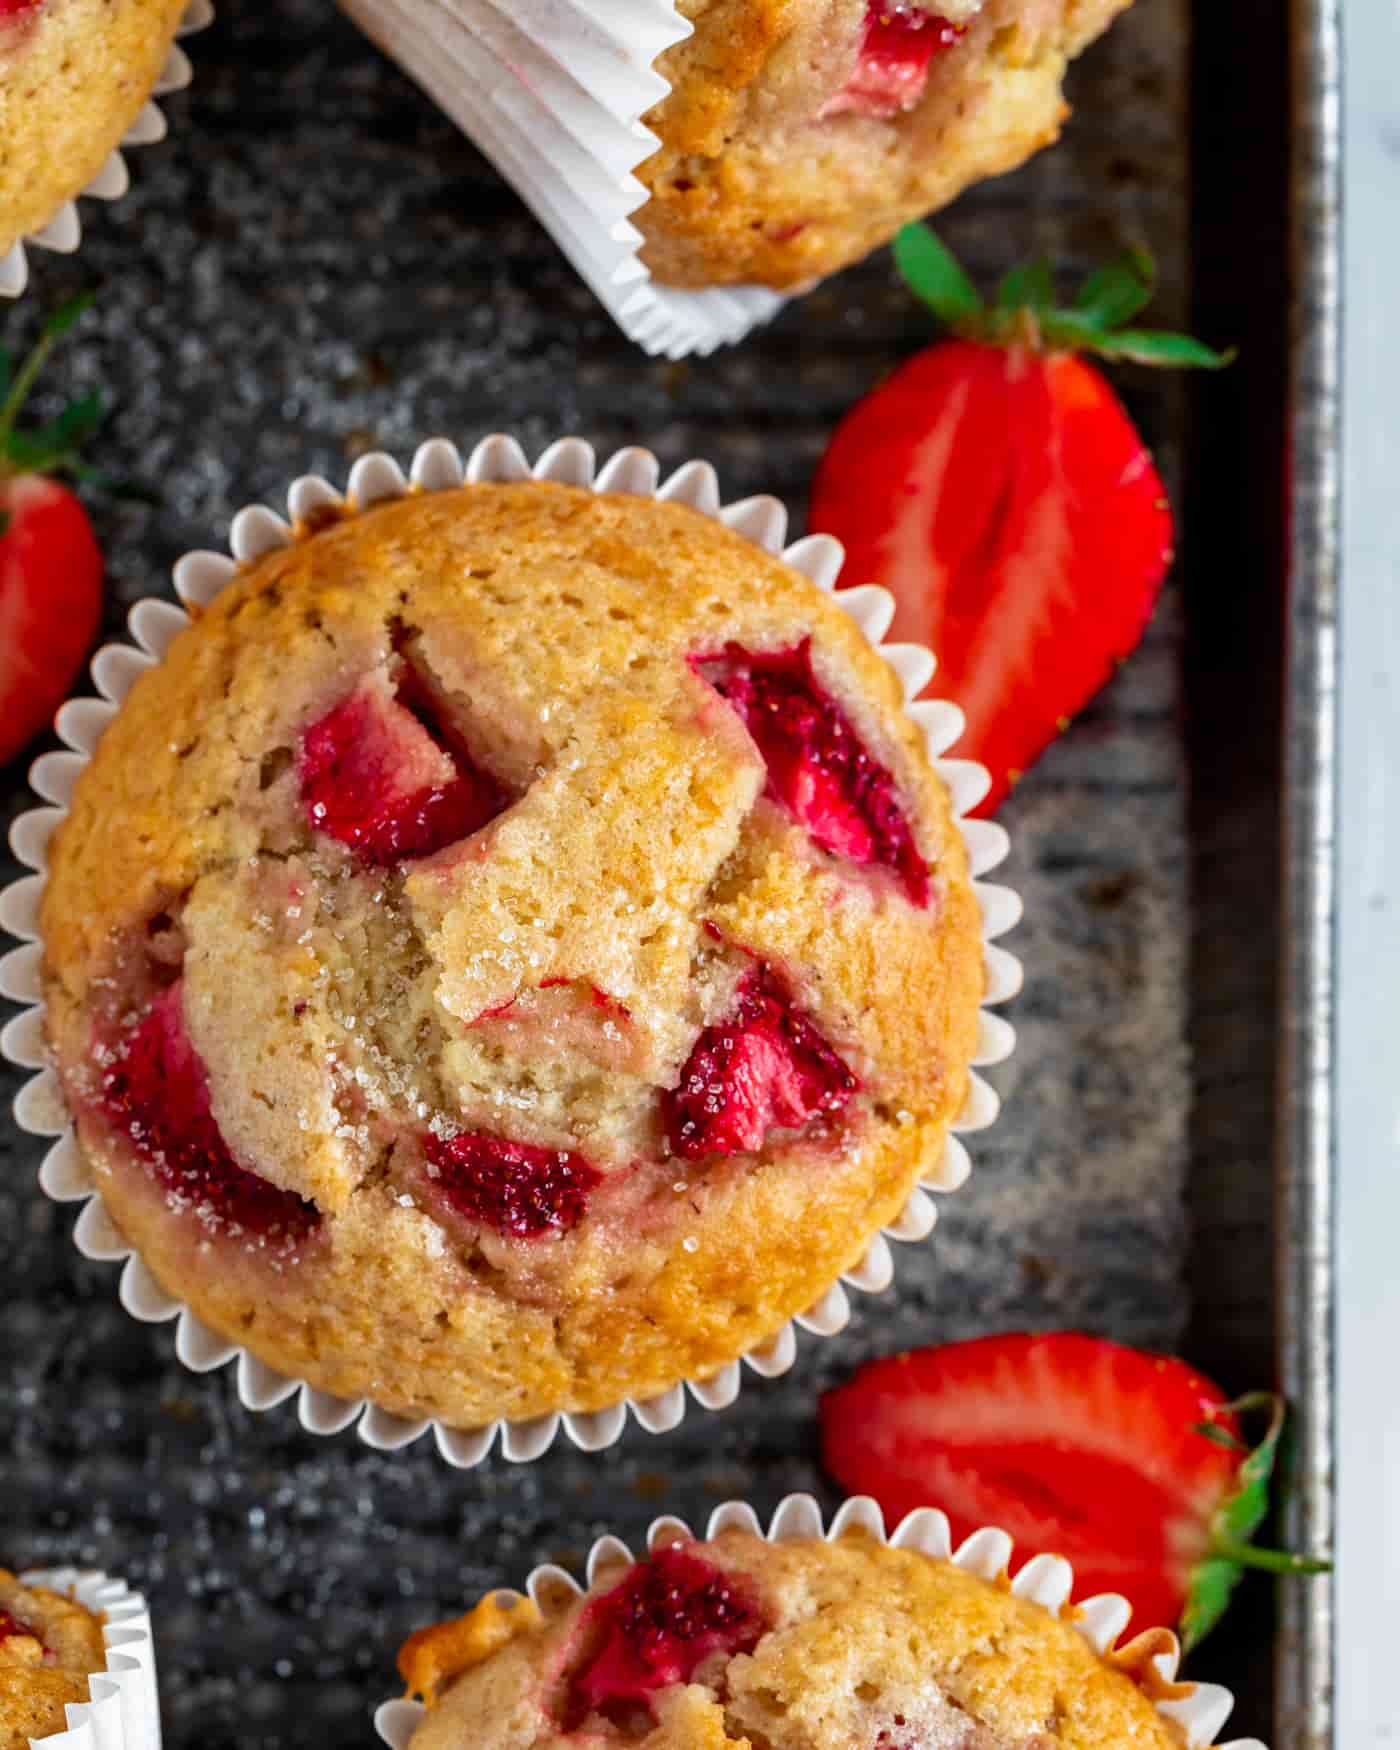 strawberry muffins on a metal baking tray with sliced strawberries scattered and two muffins lying on their sides